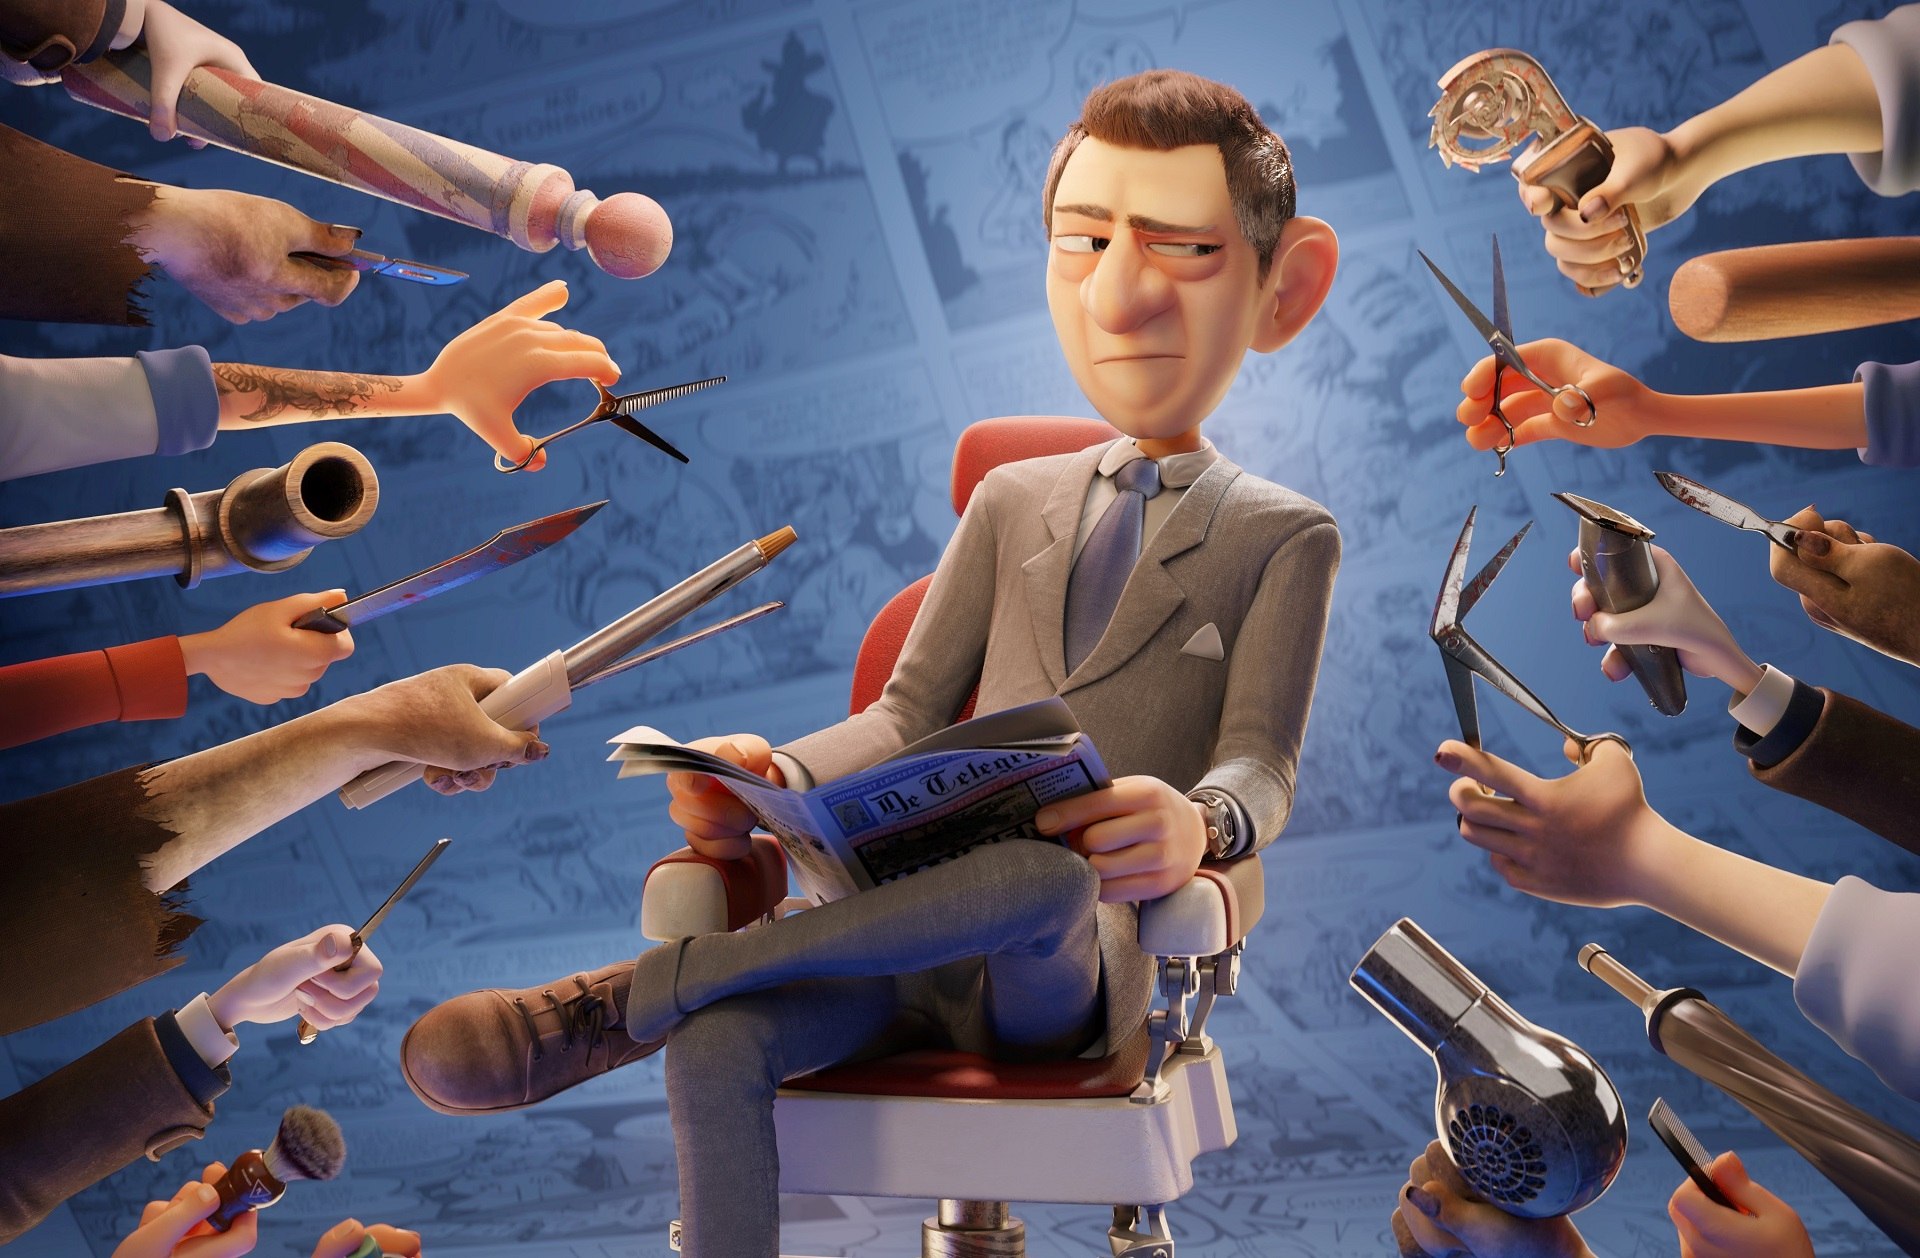 Blender Brings Cult 'Agent 327' to Life in 3D Animation Network